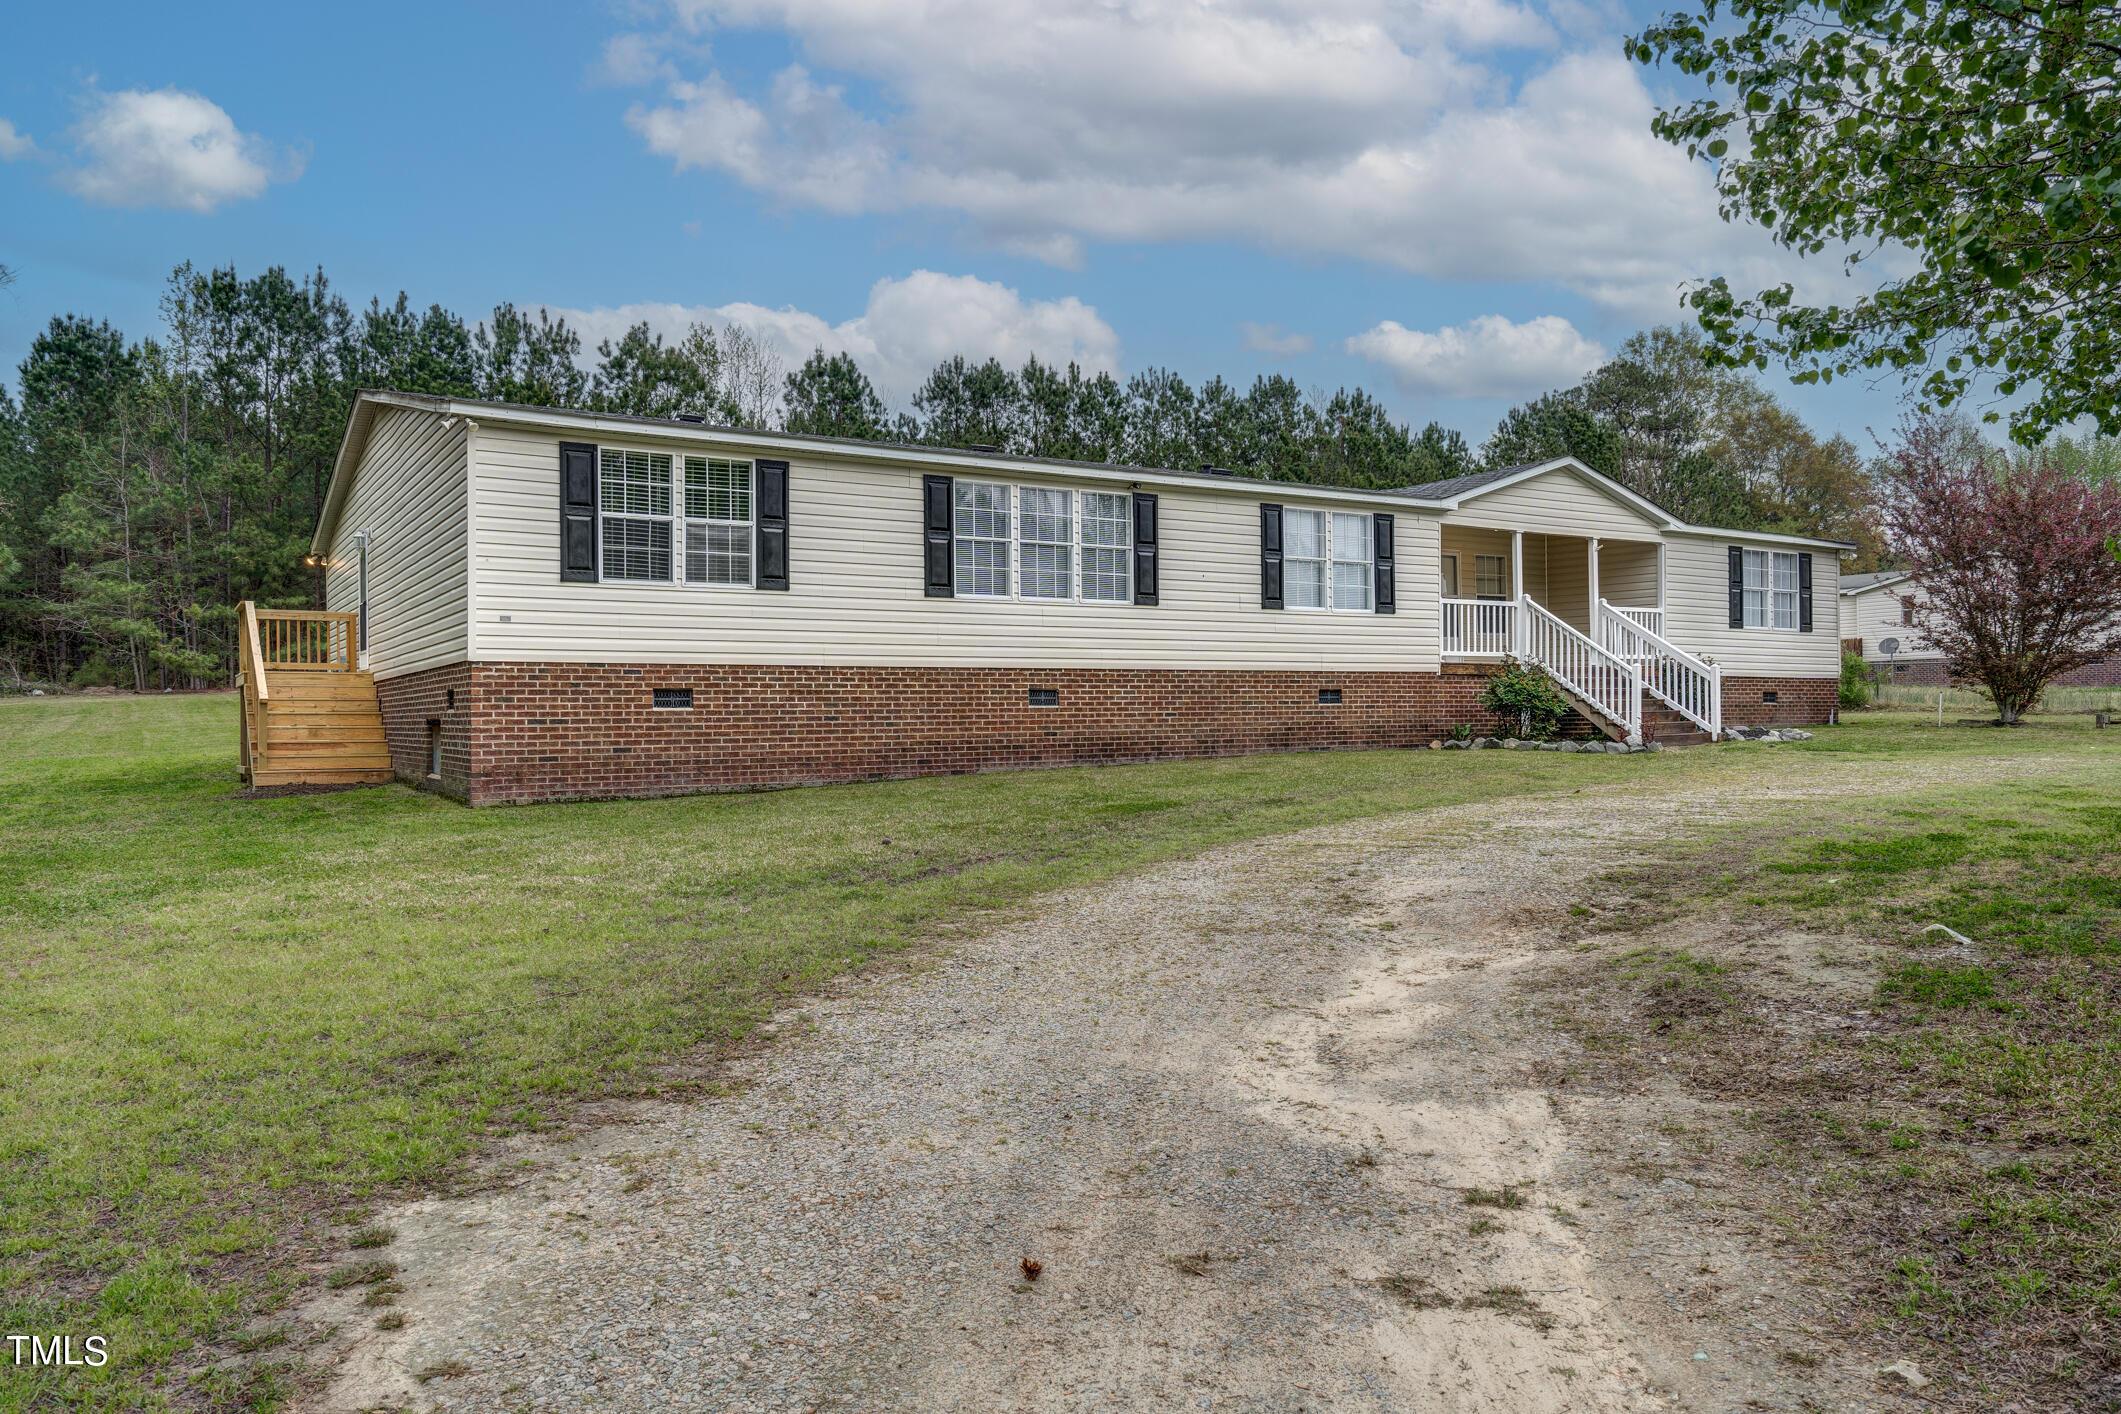 Photo one of 4762 Kaitlin Rd Rocky Mount NC 27803 | MLS 10020618